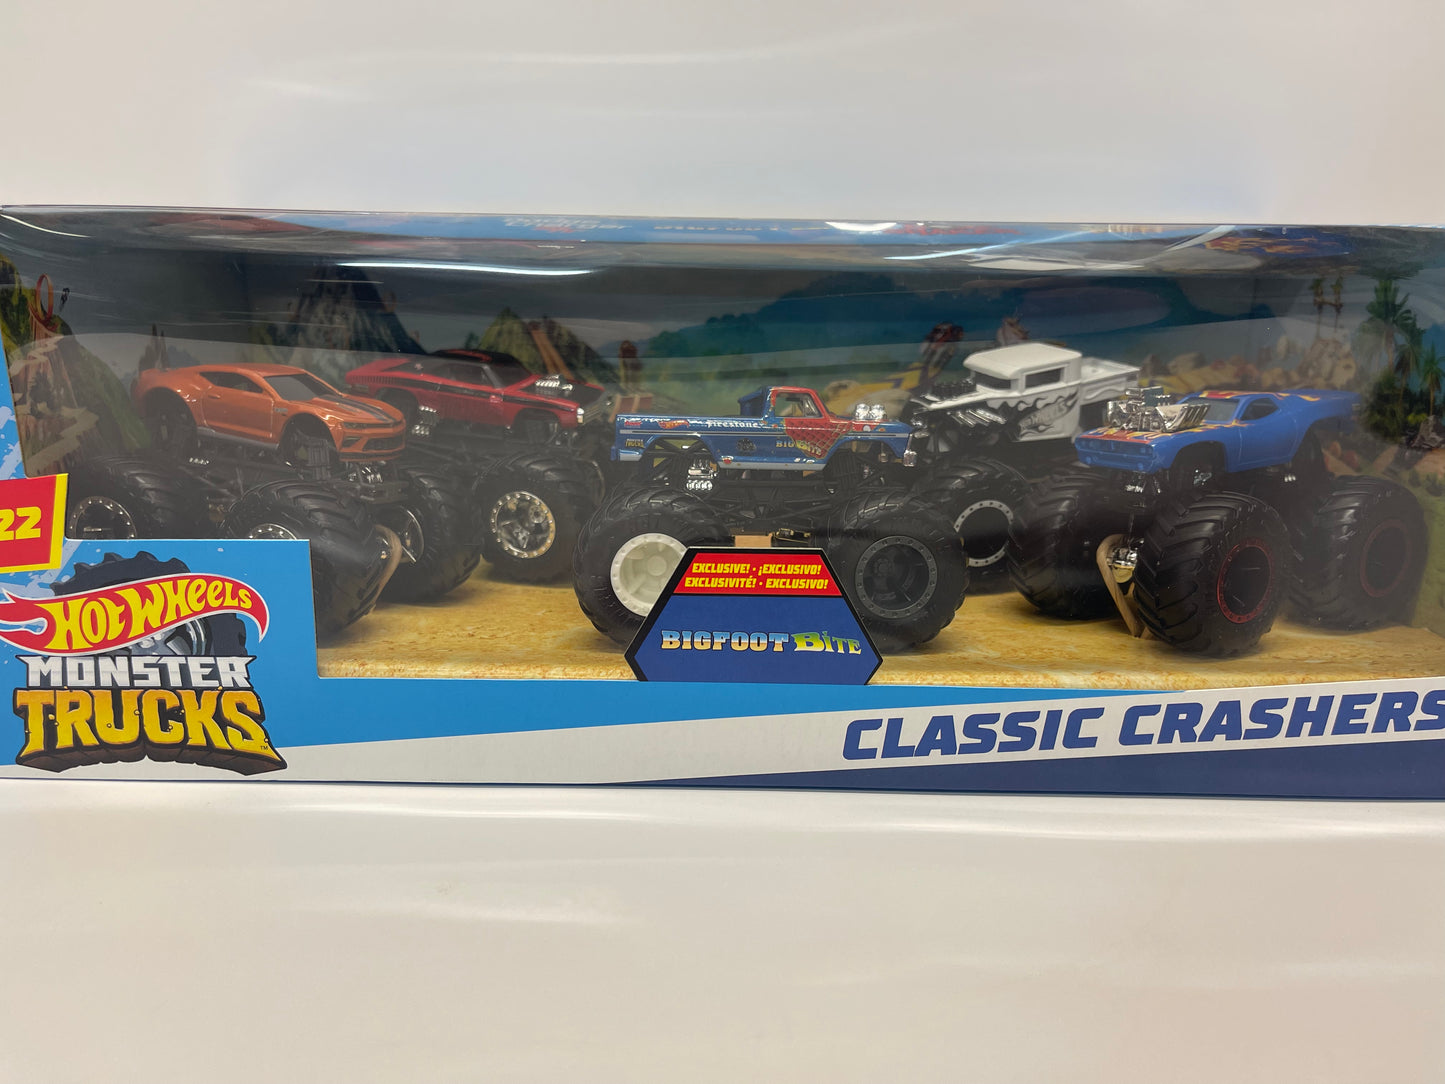 HOT WHEELS MONSTER TRUCK SETS! 5-per set 2 Versions Available!